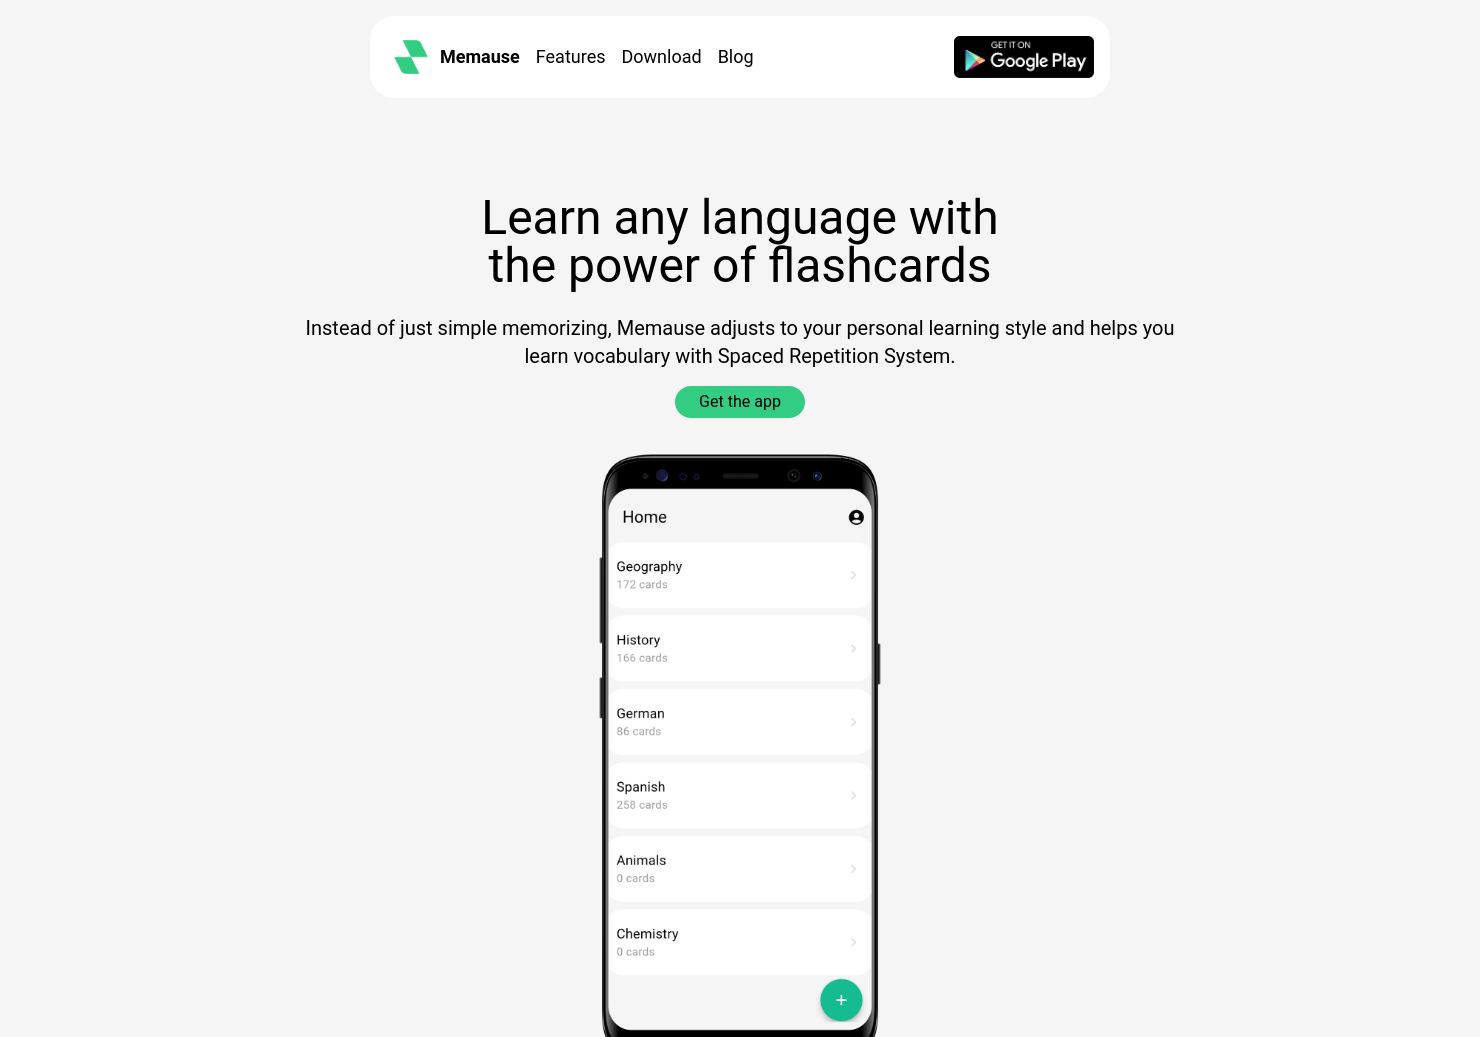 startuptile Memause-Learn any language with the power of flashcards